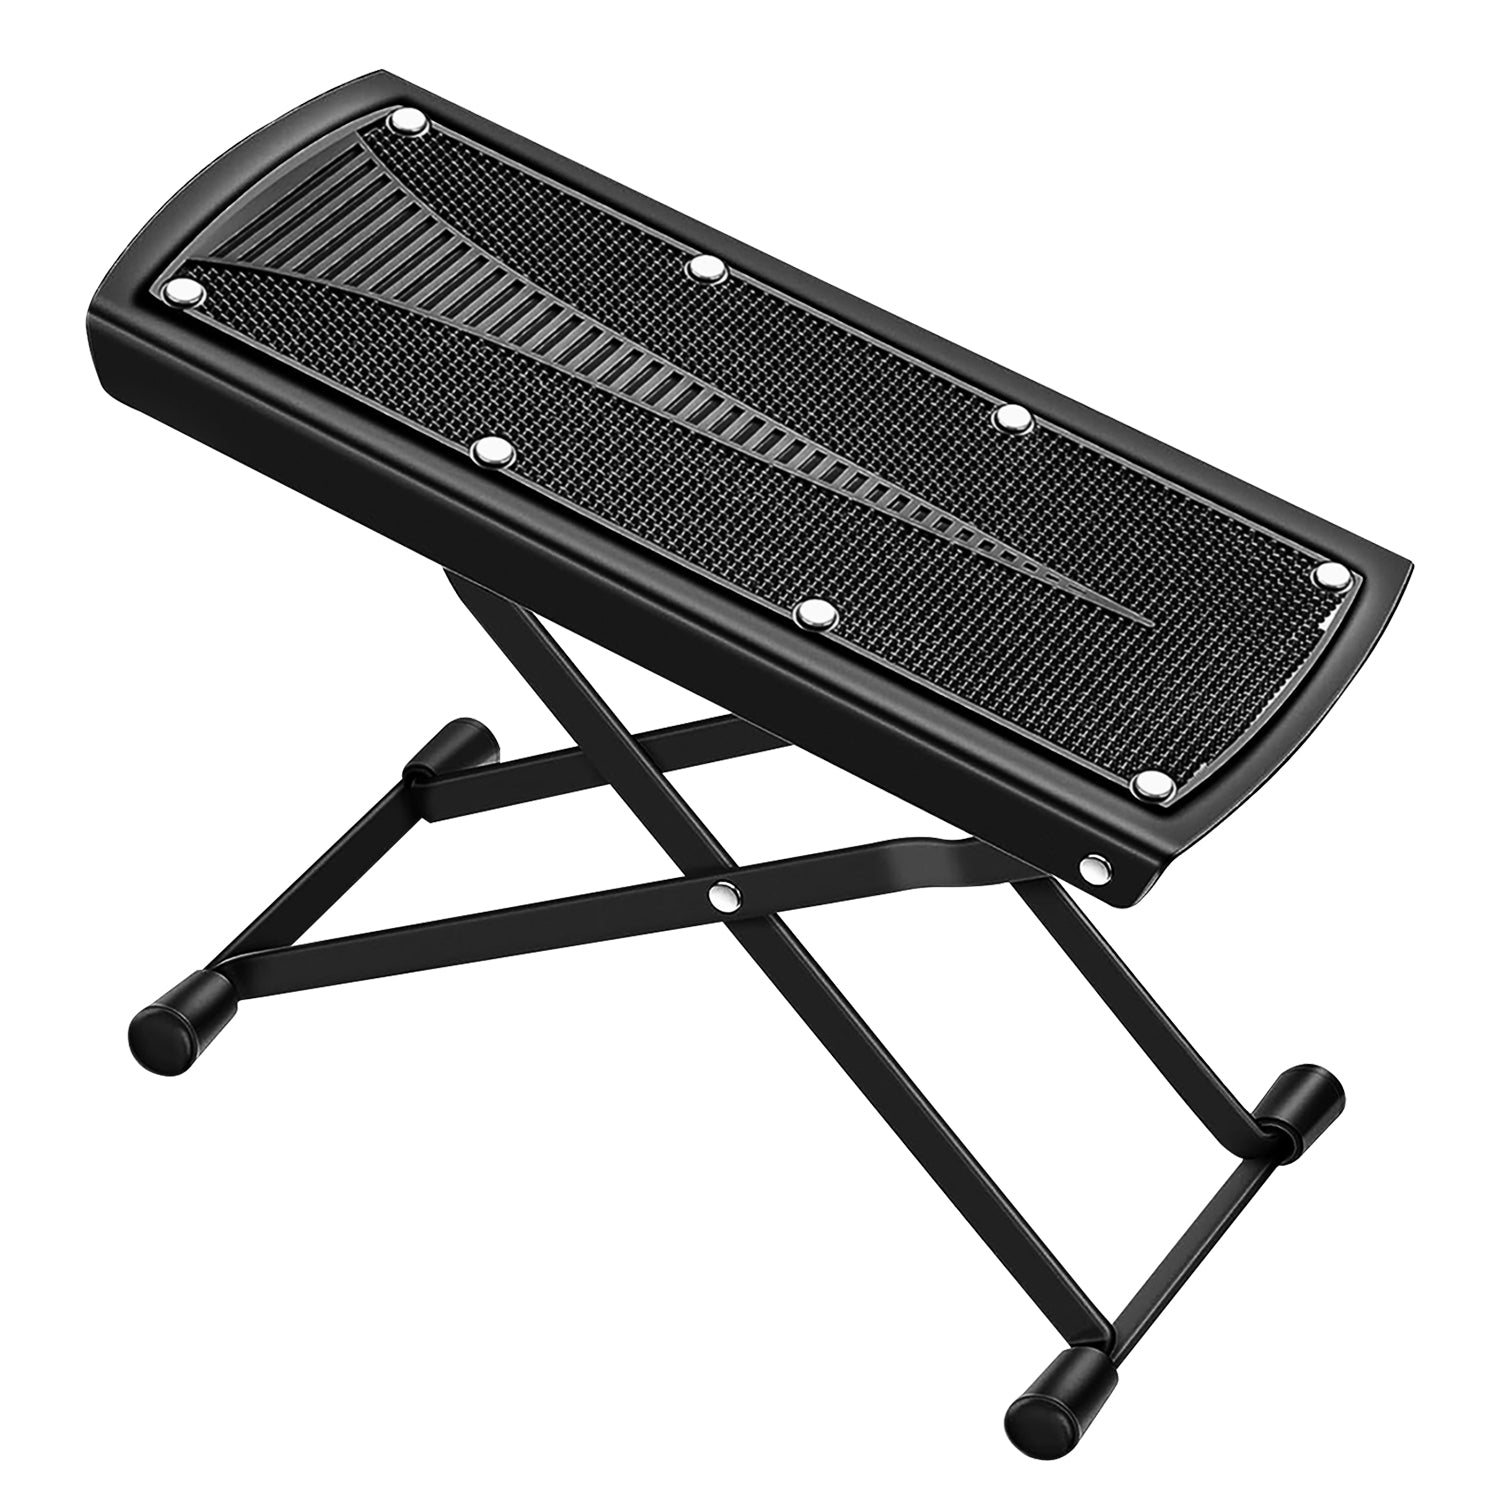 5 Core Guitar Foot Stool 6 Level Height Adjustable Leg Rest Rubber Pad Stable Foot Stand Black